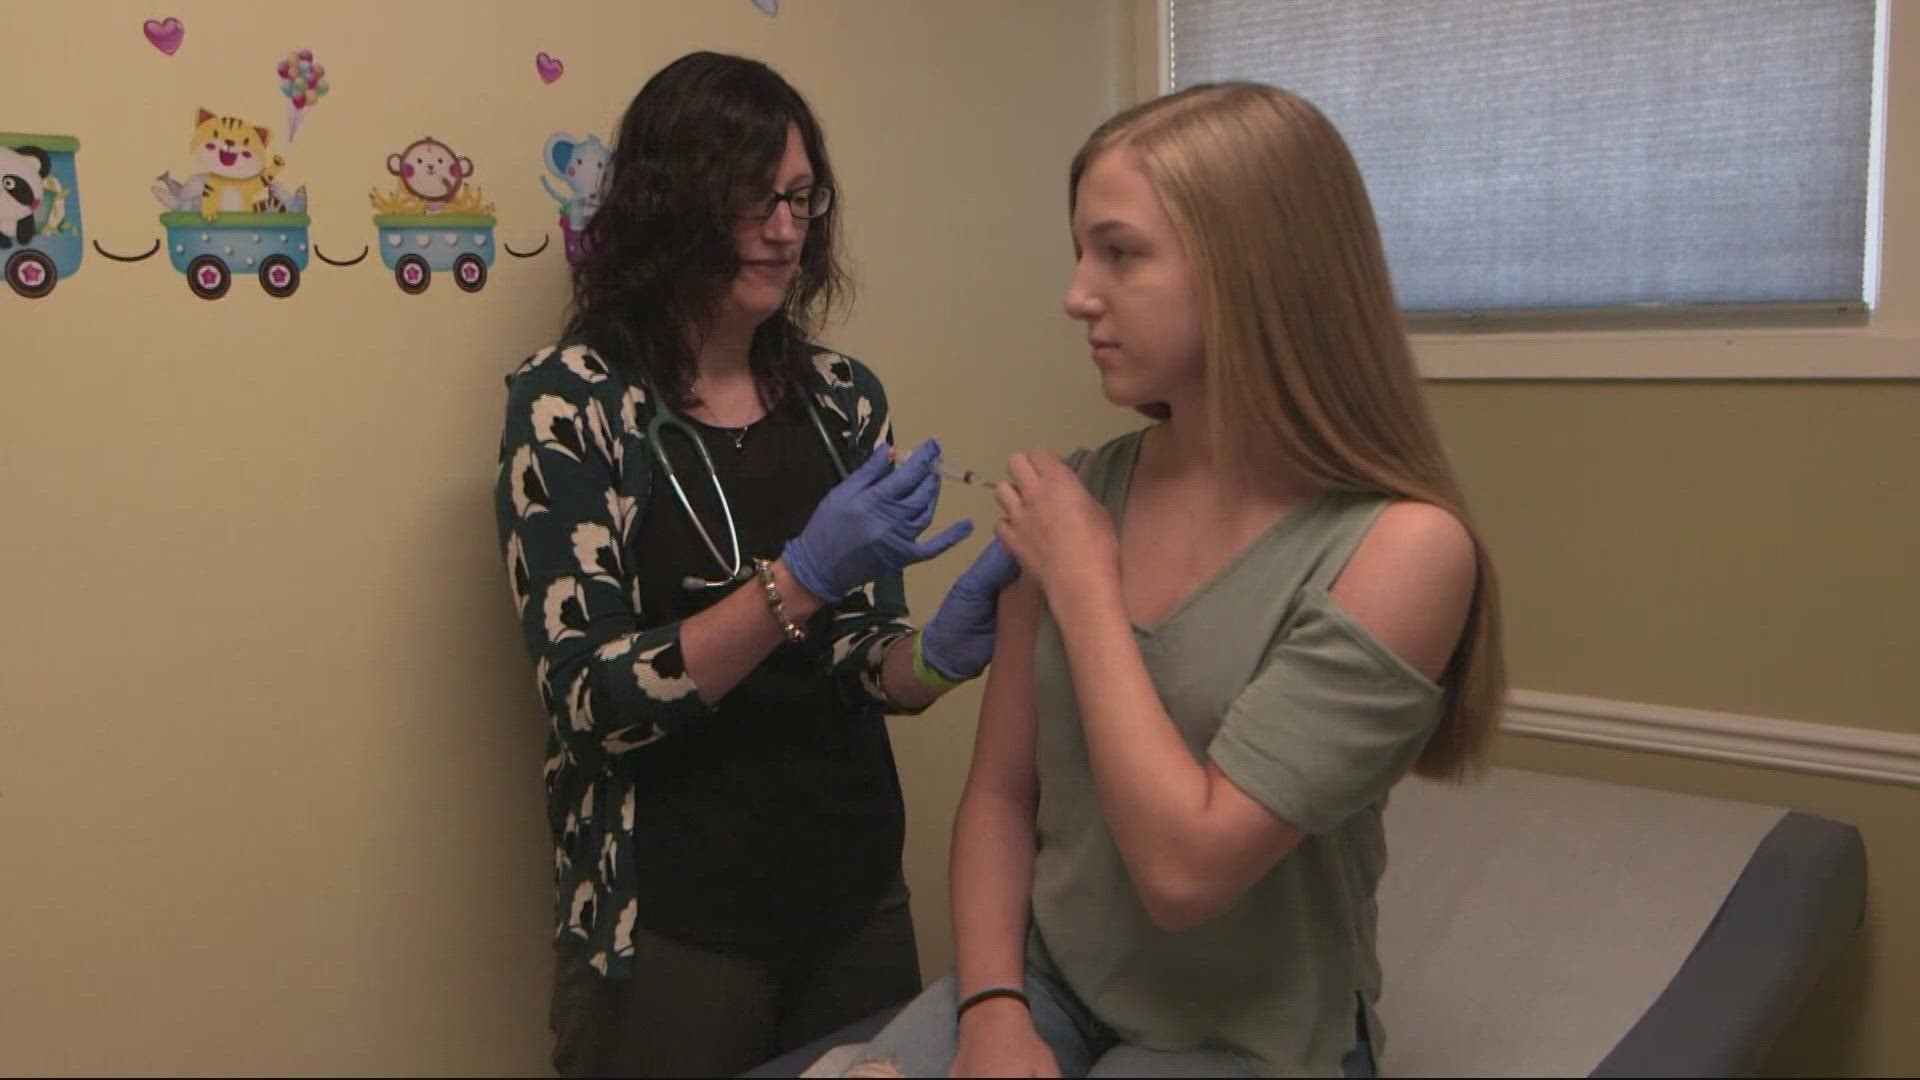 Katie Sharff of Kaiser Permanent Northwest believes Oregon will see a lot of flu activity this fall and winter.